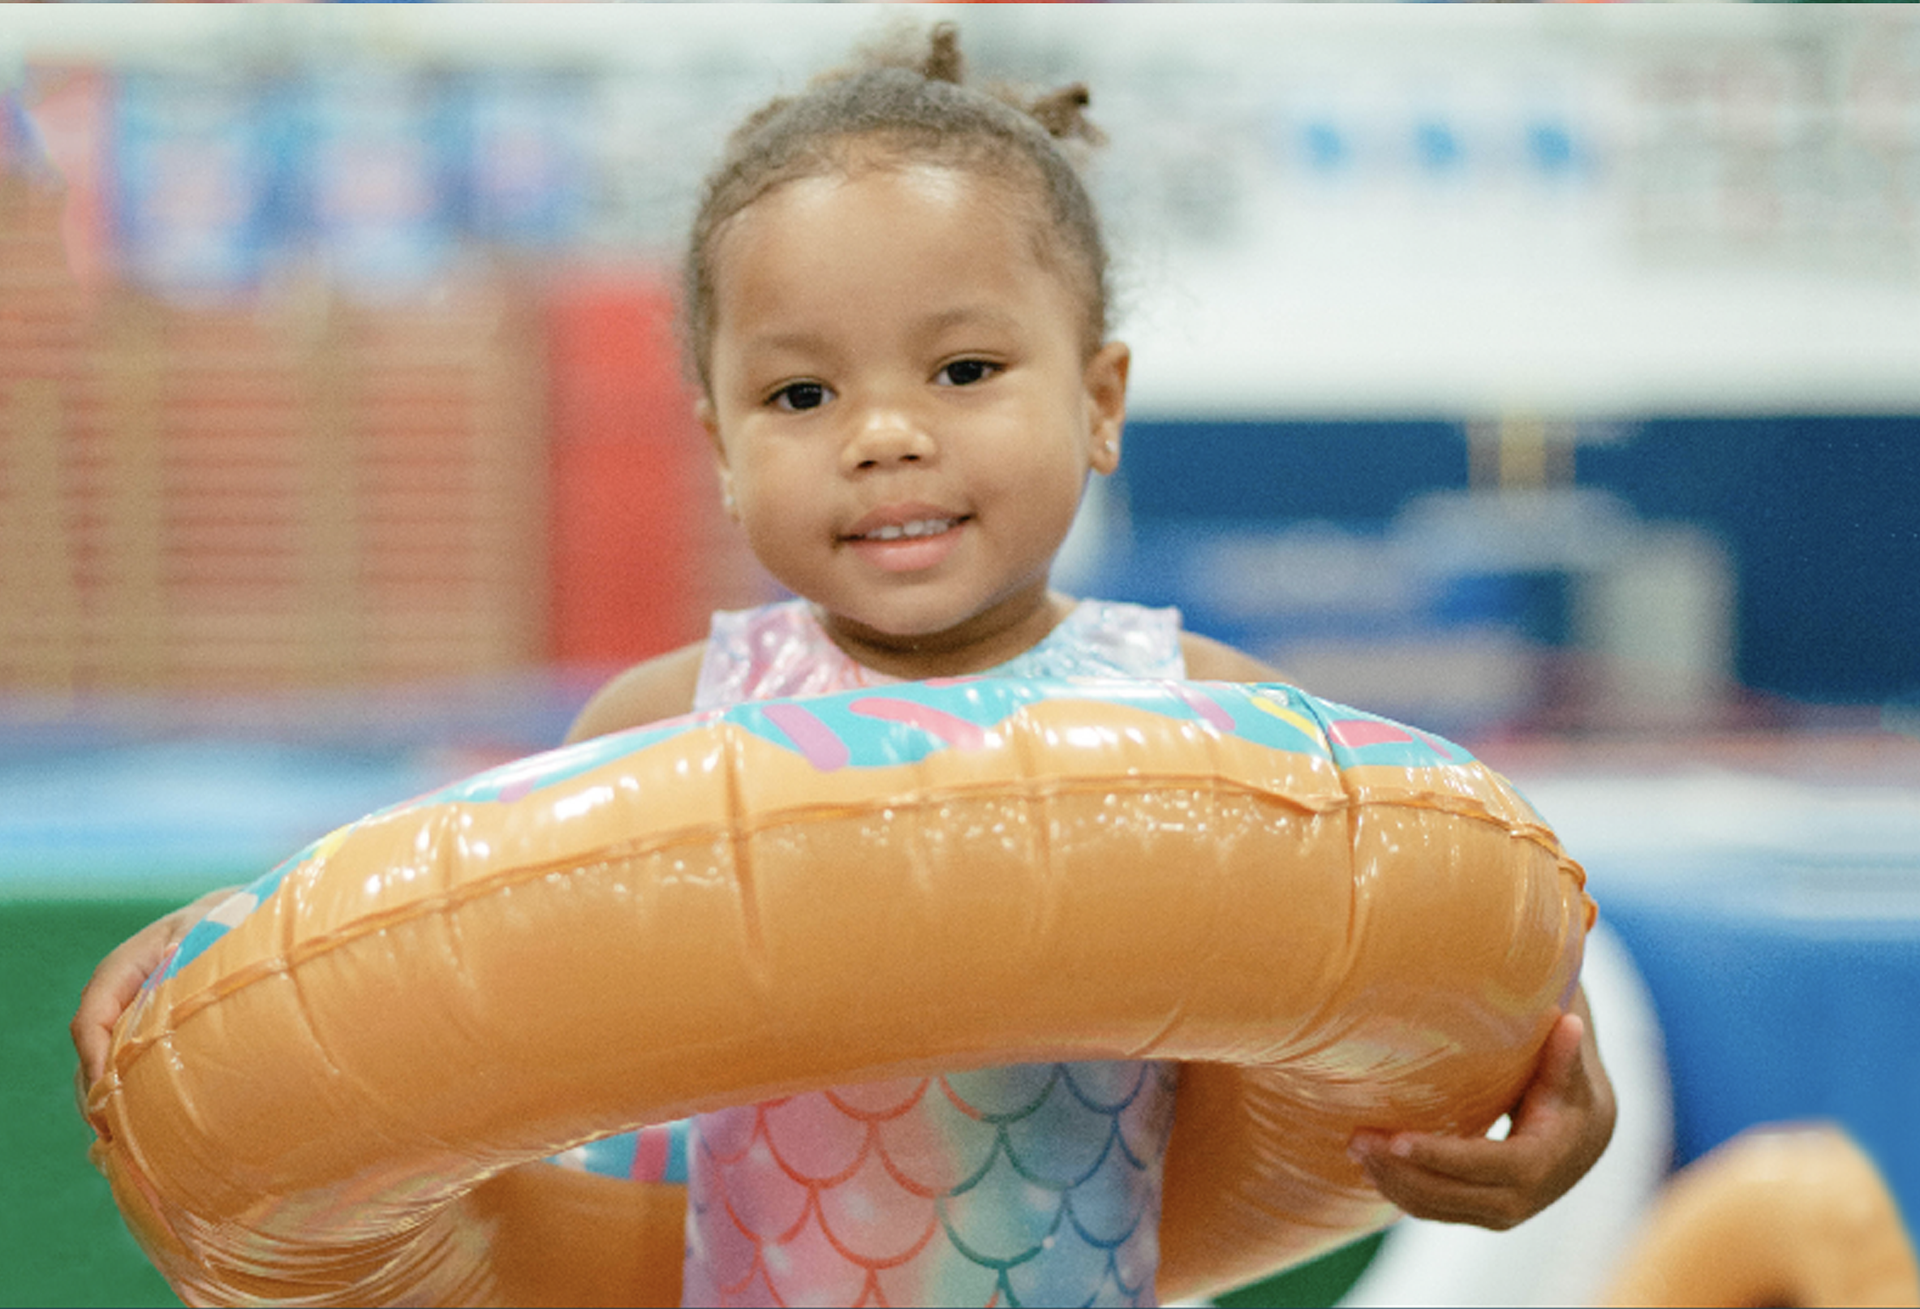 A little girl is holding an inflatable ring in her hands.